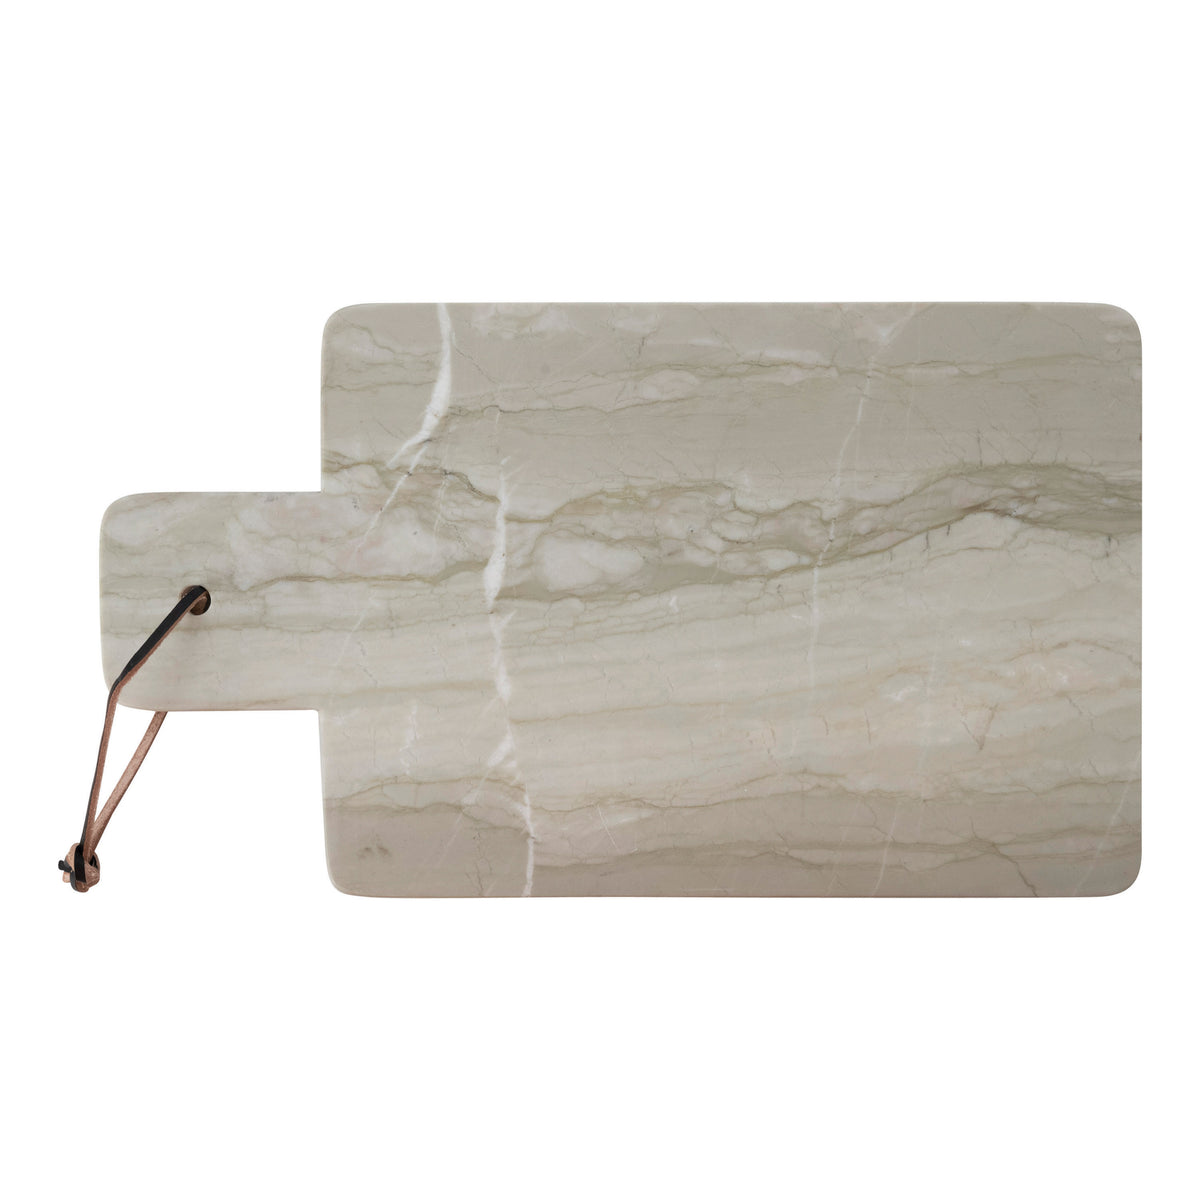 16"L Marble Cheese/Cutting Board